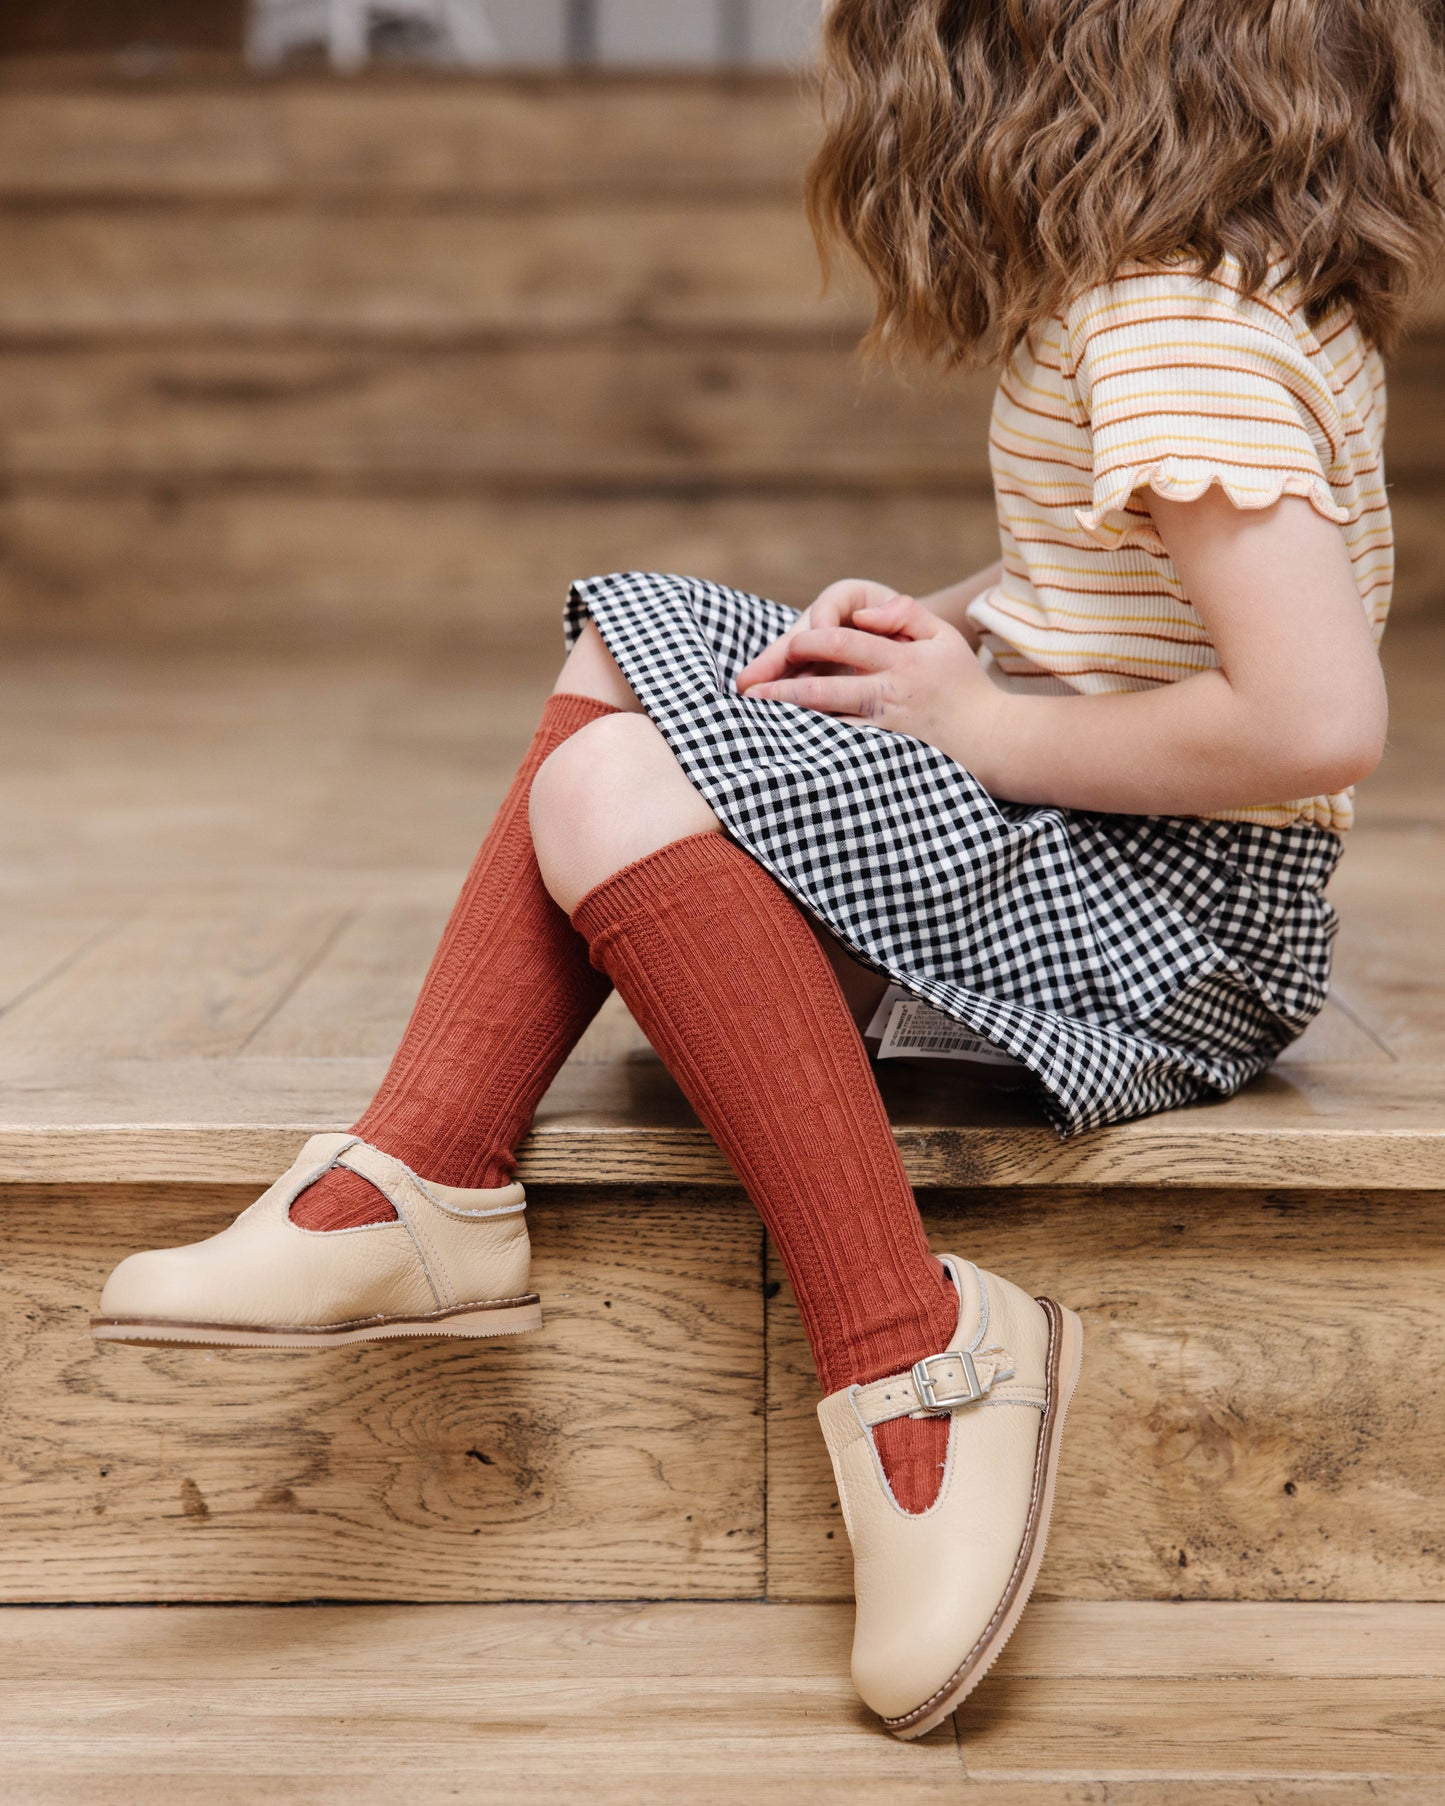 Little Stocking Co Rust Cable Knit Knee High Socks